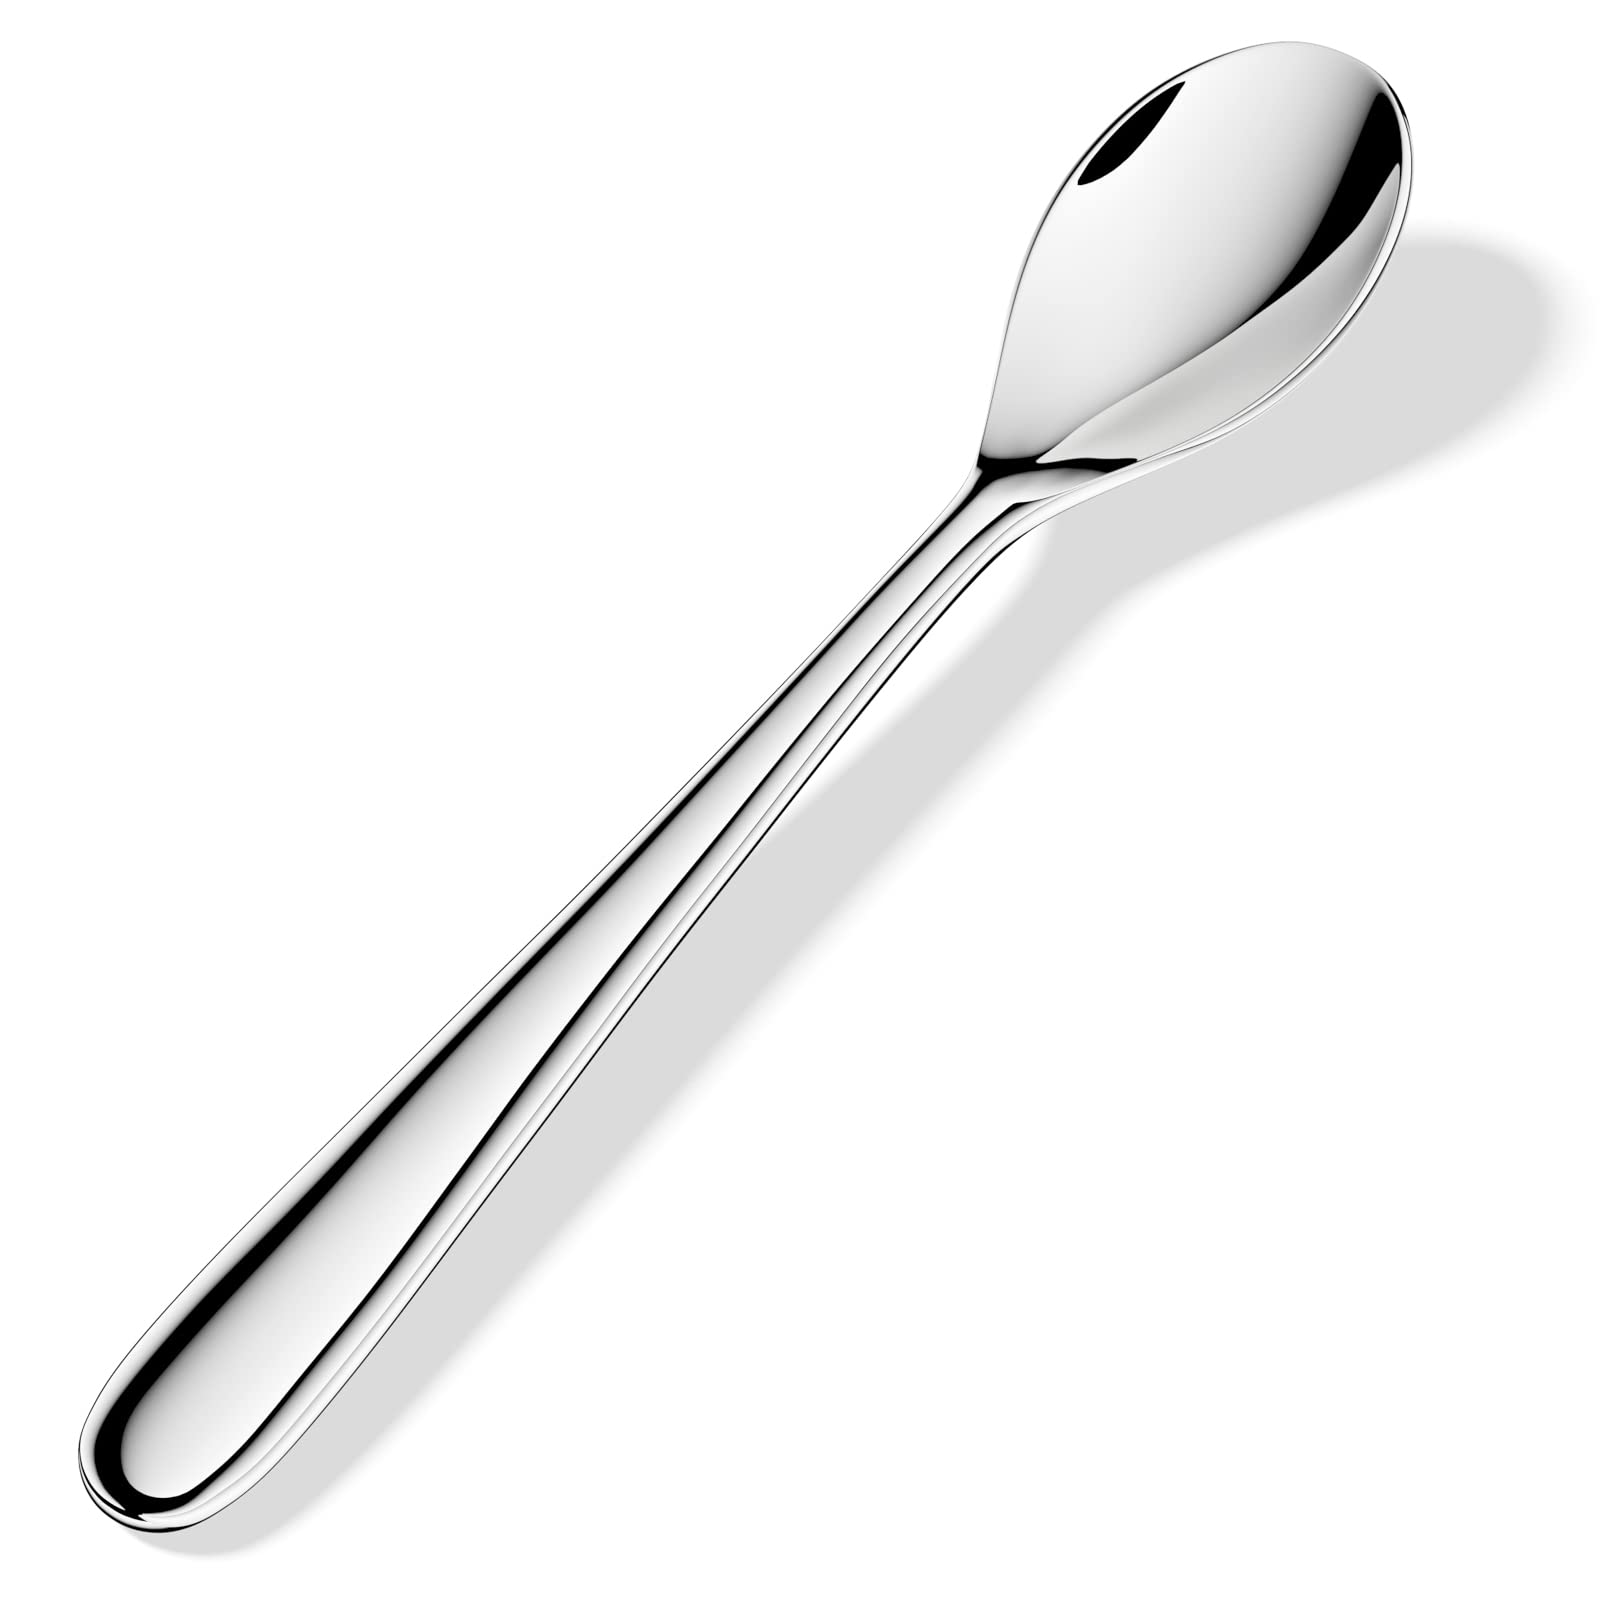 Demitasse Espresso Spoons,Forged 18/10 Stainless Steel Mini Teaspoons Coffee Spoons Bistro Spoons,4.7 Inch,Set of 4,Heavy Duty and Dishwasher Safe